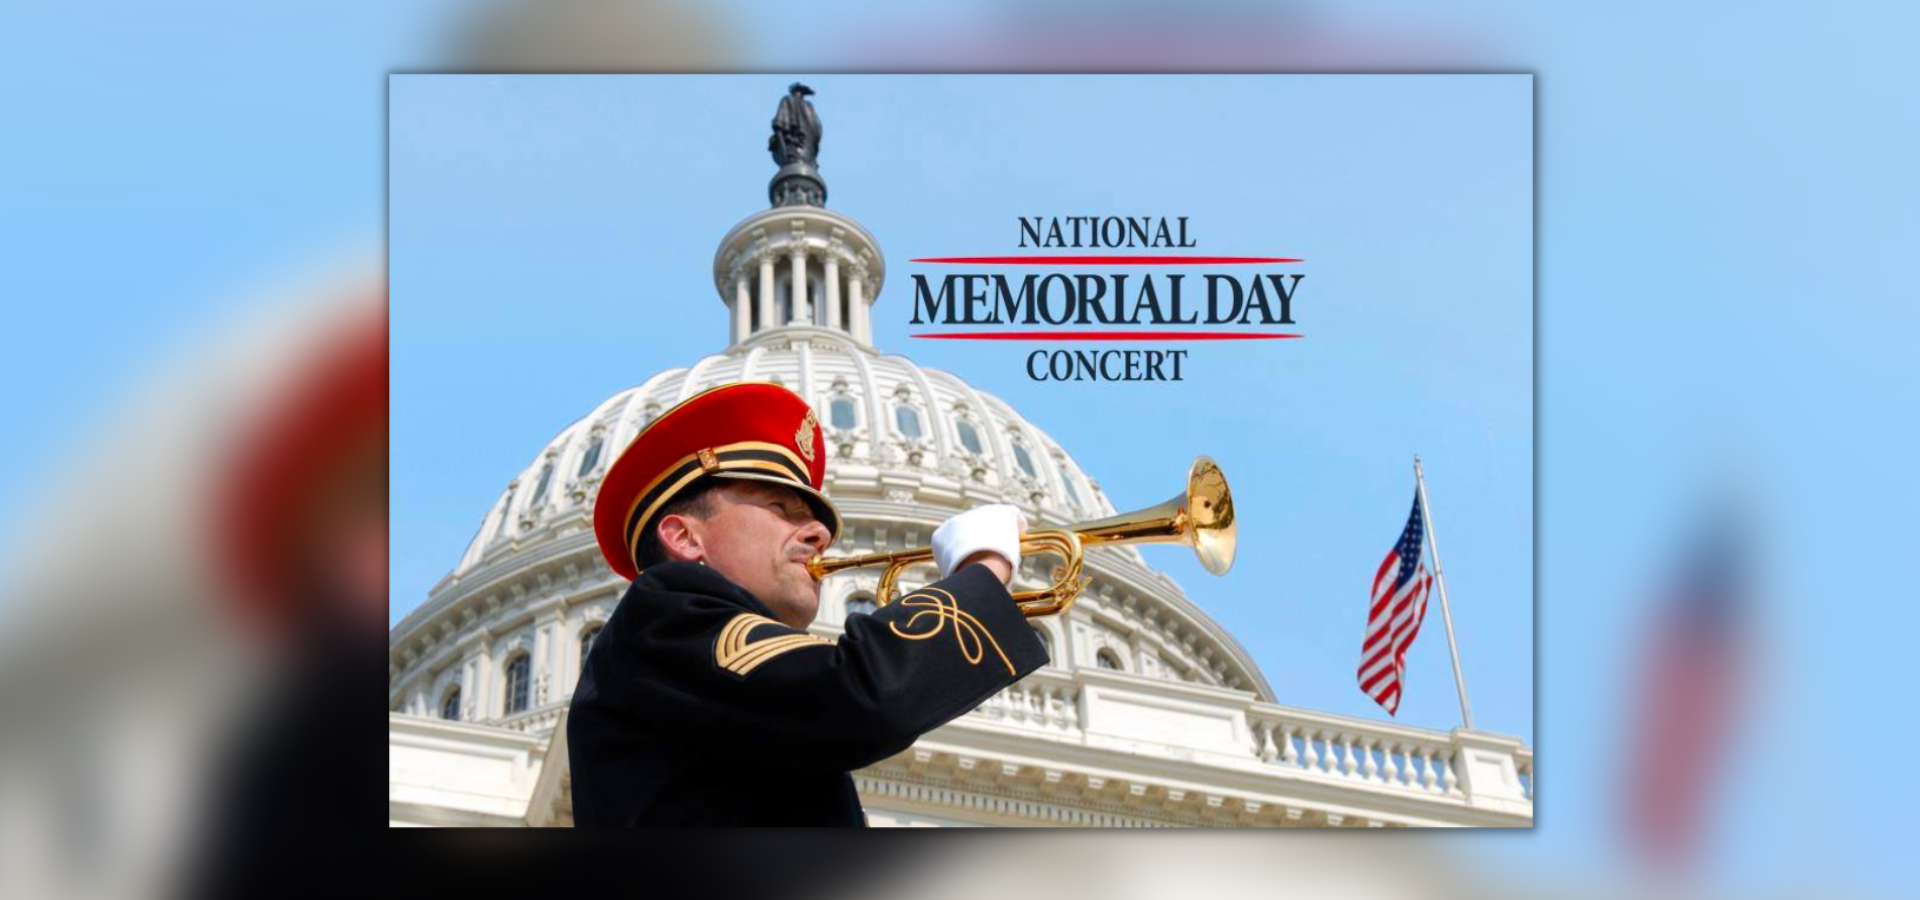 PBS National Memorial Day Concert Featuring Yolanda Adams and Others